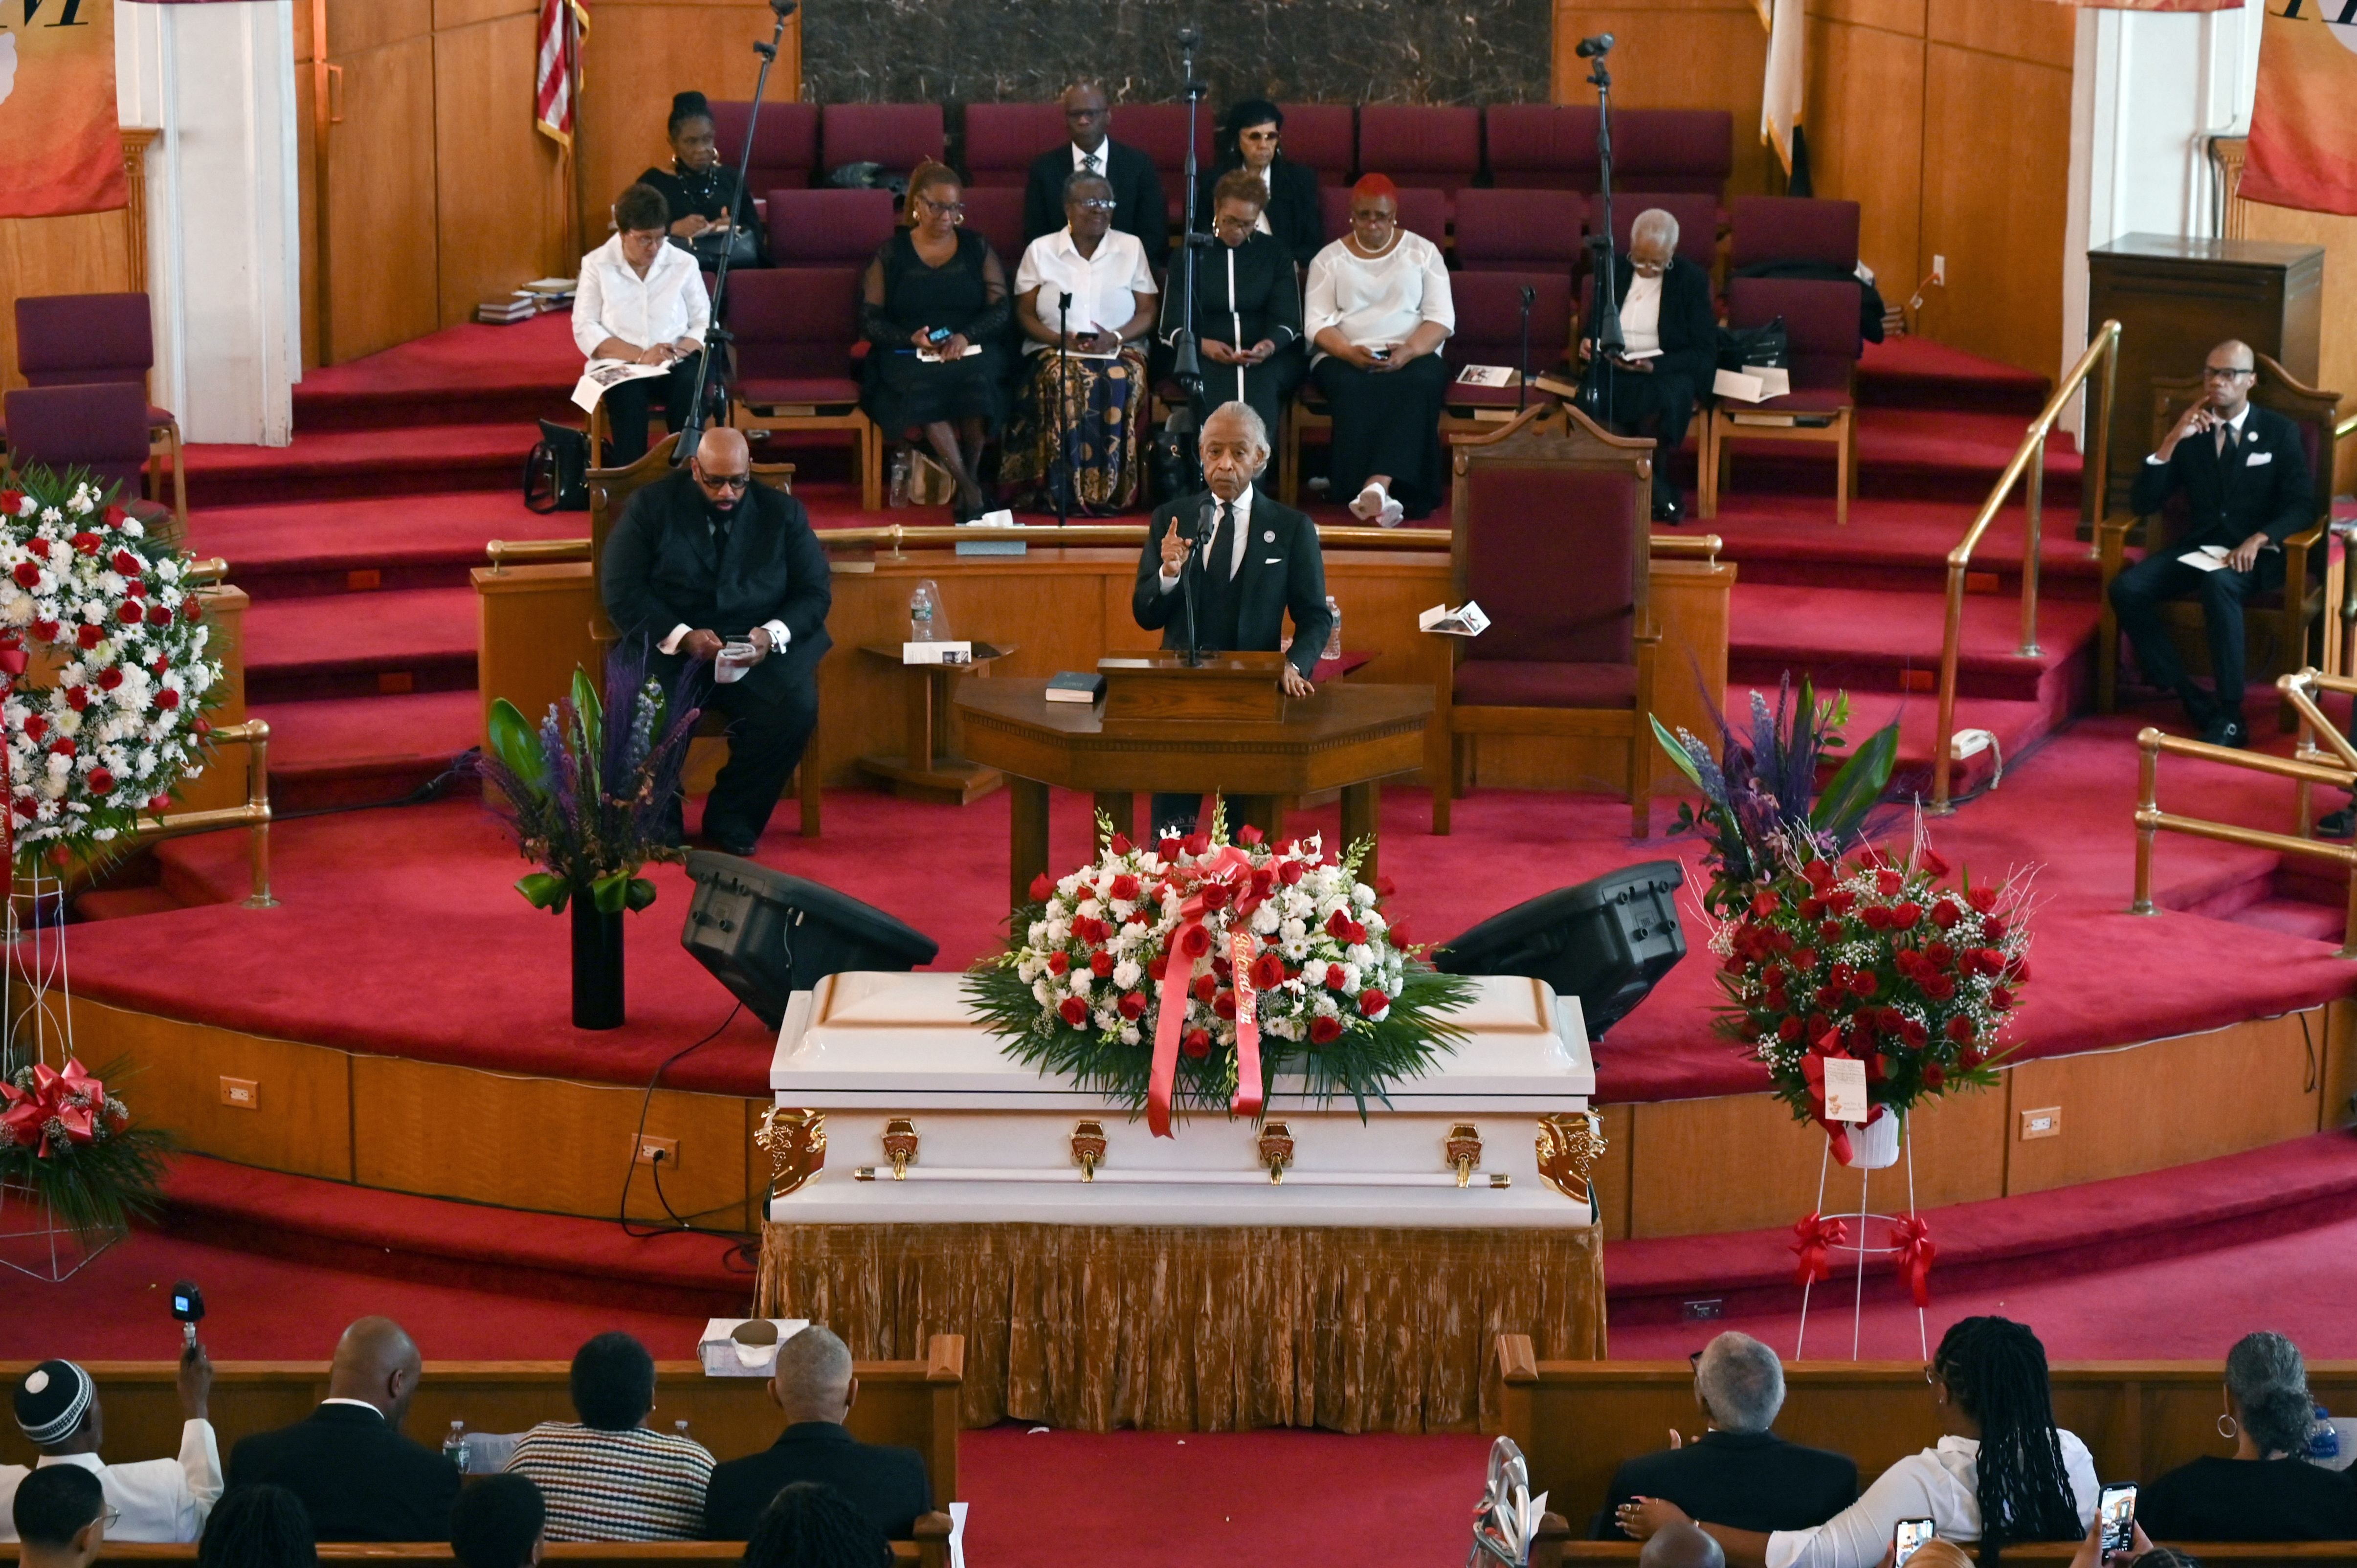 The Rev, Al Sharpton speaks the funeral service for Jordan Neely, at Mount Neboh Baptist Church in the Harlem neighborhood of New York City on May 19, 2023.